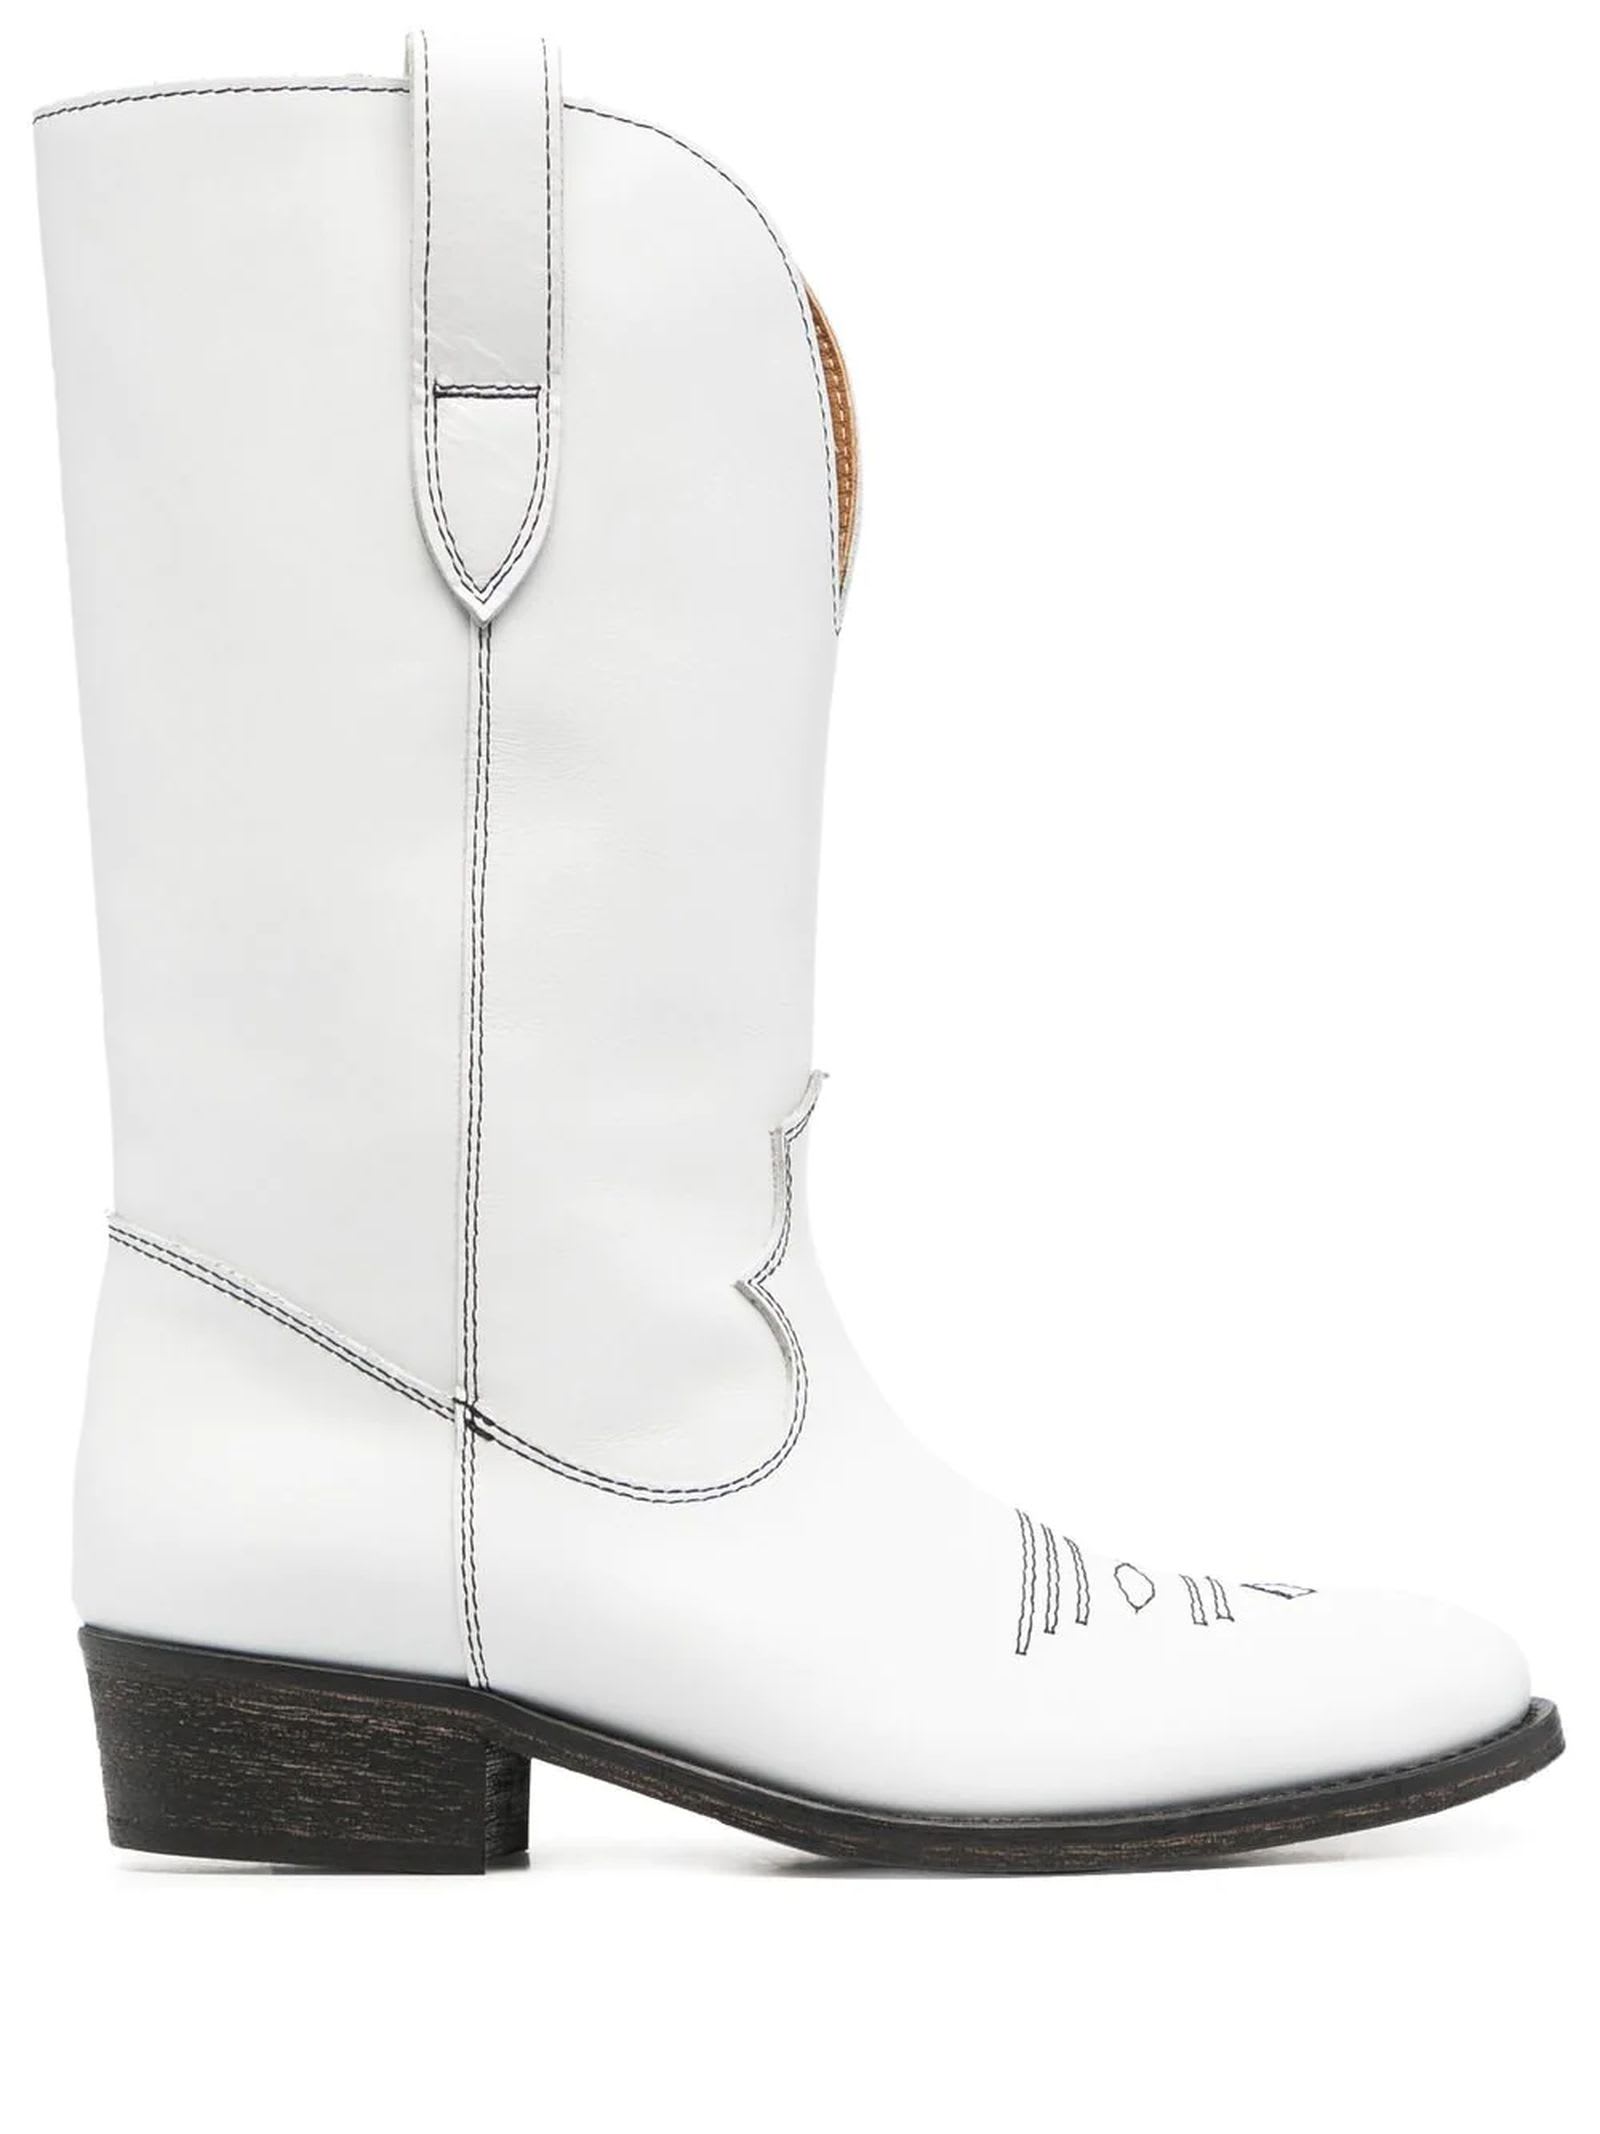 VIA ROMA 15 WHITE LEATHER WESTERN BOOTS